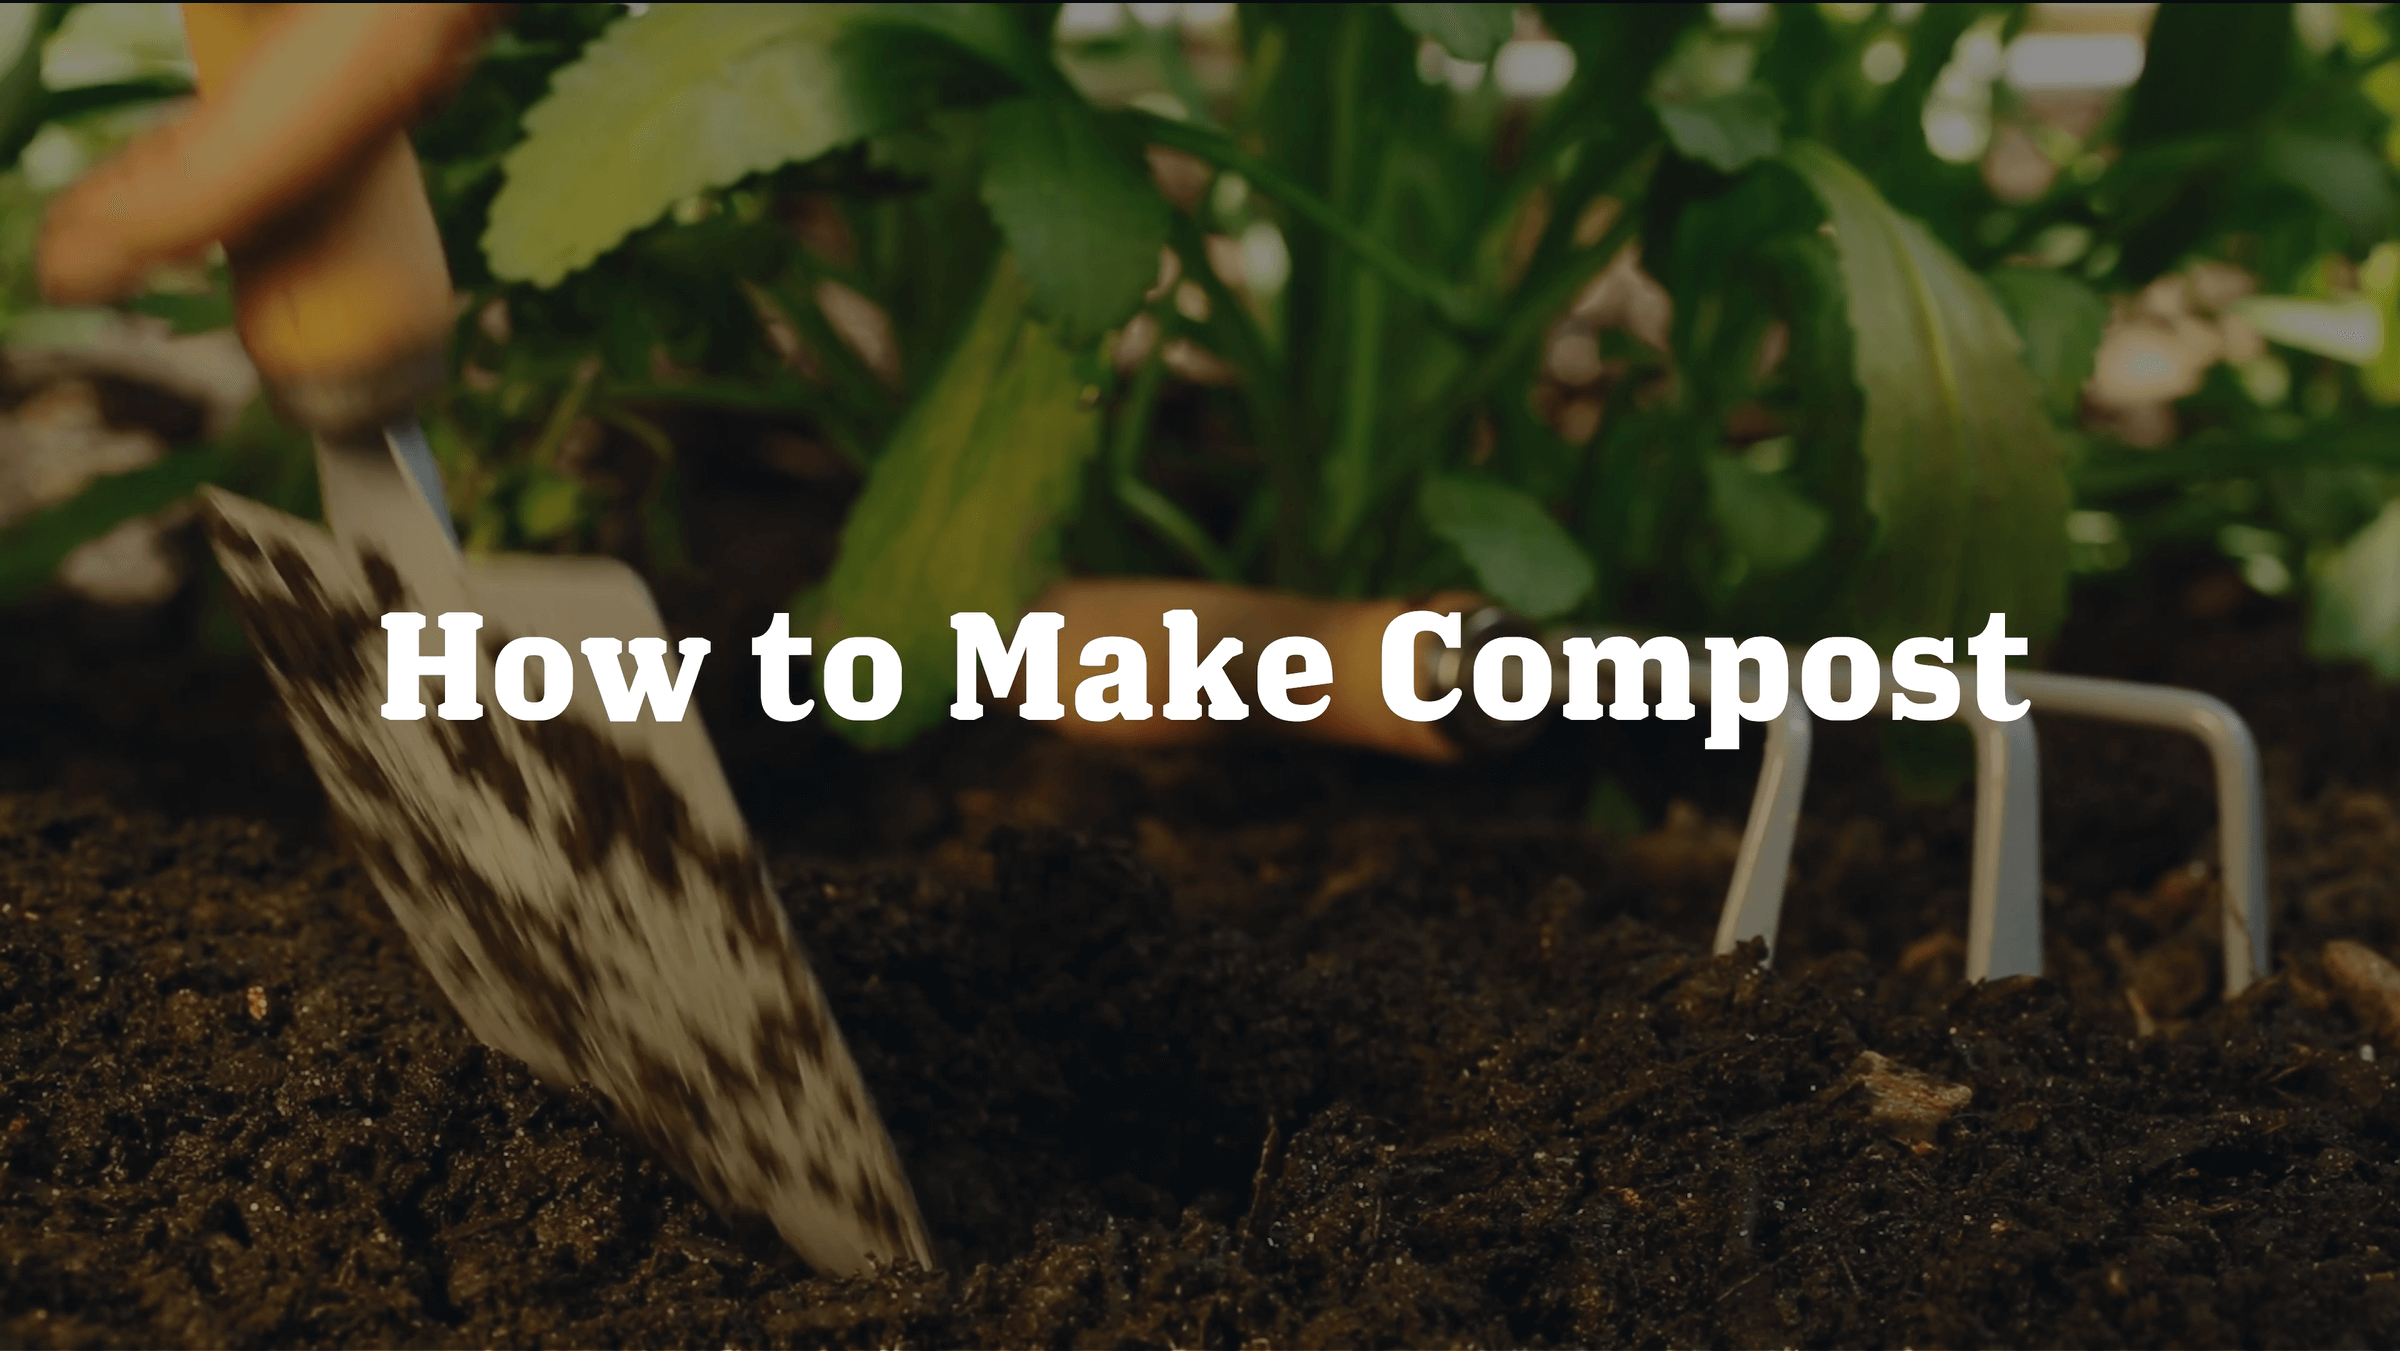 film-still-1-how-to-compost